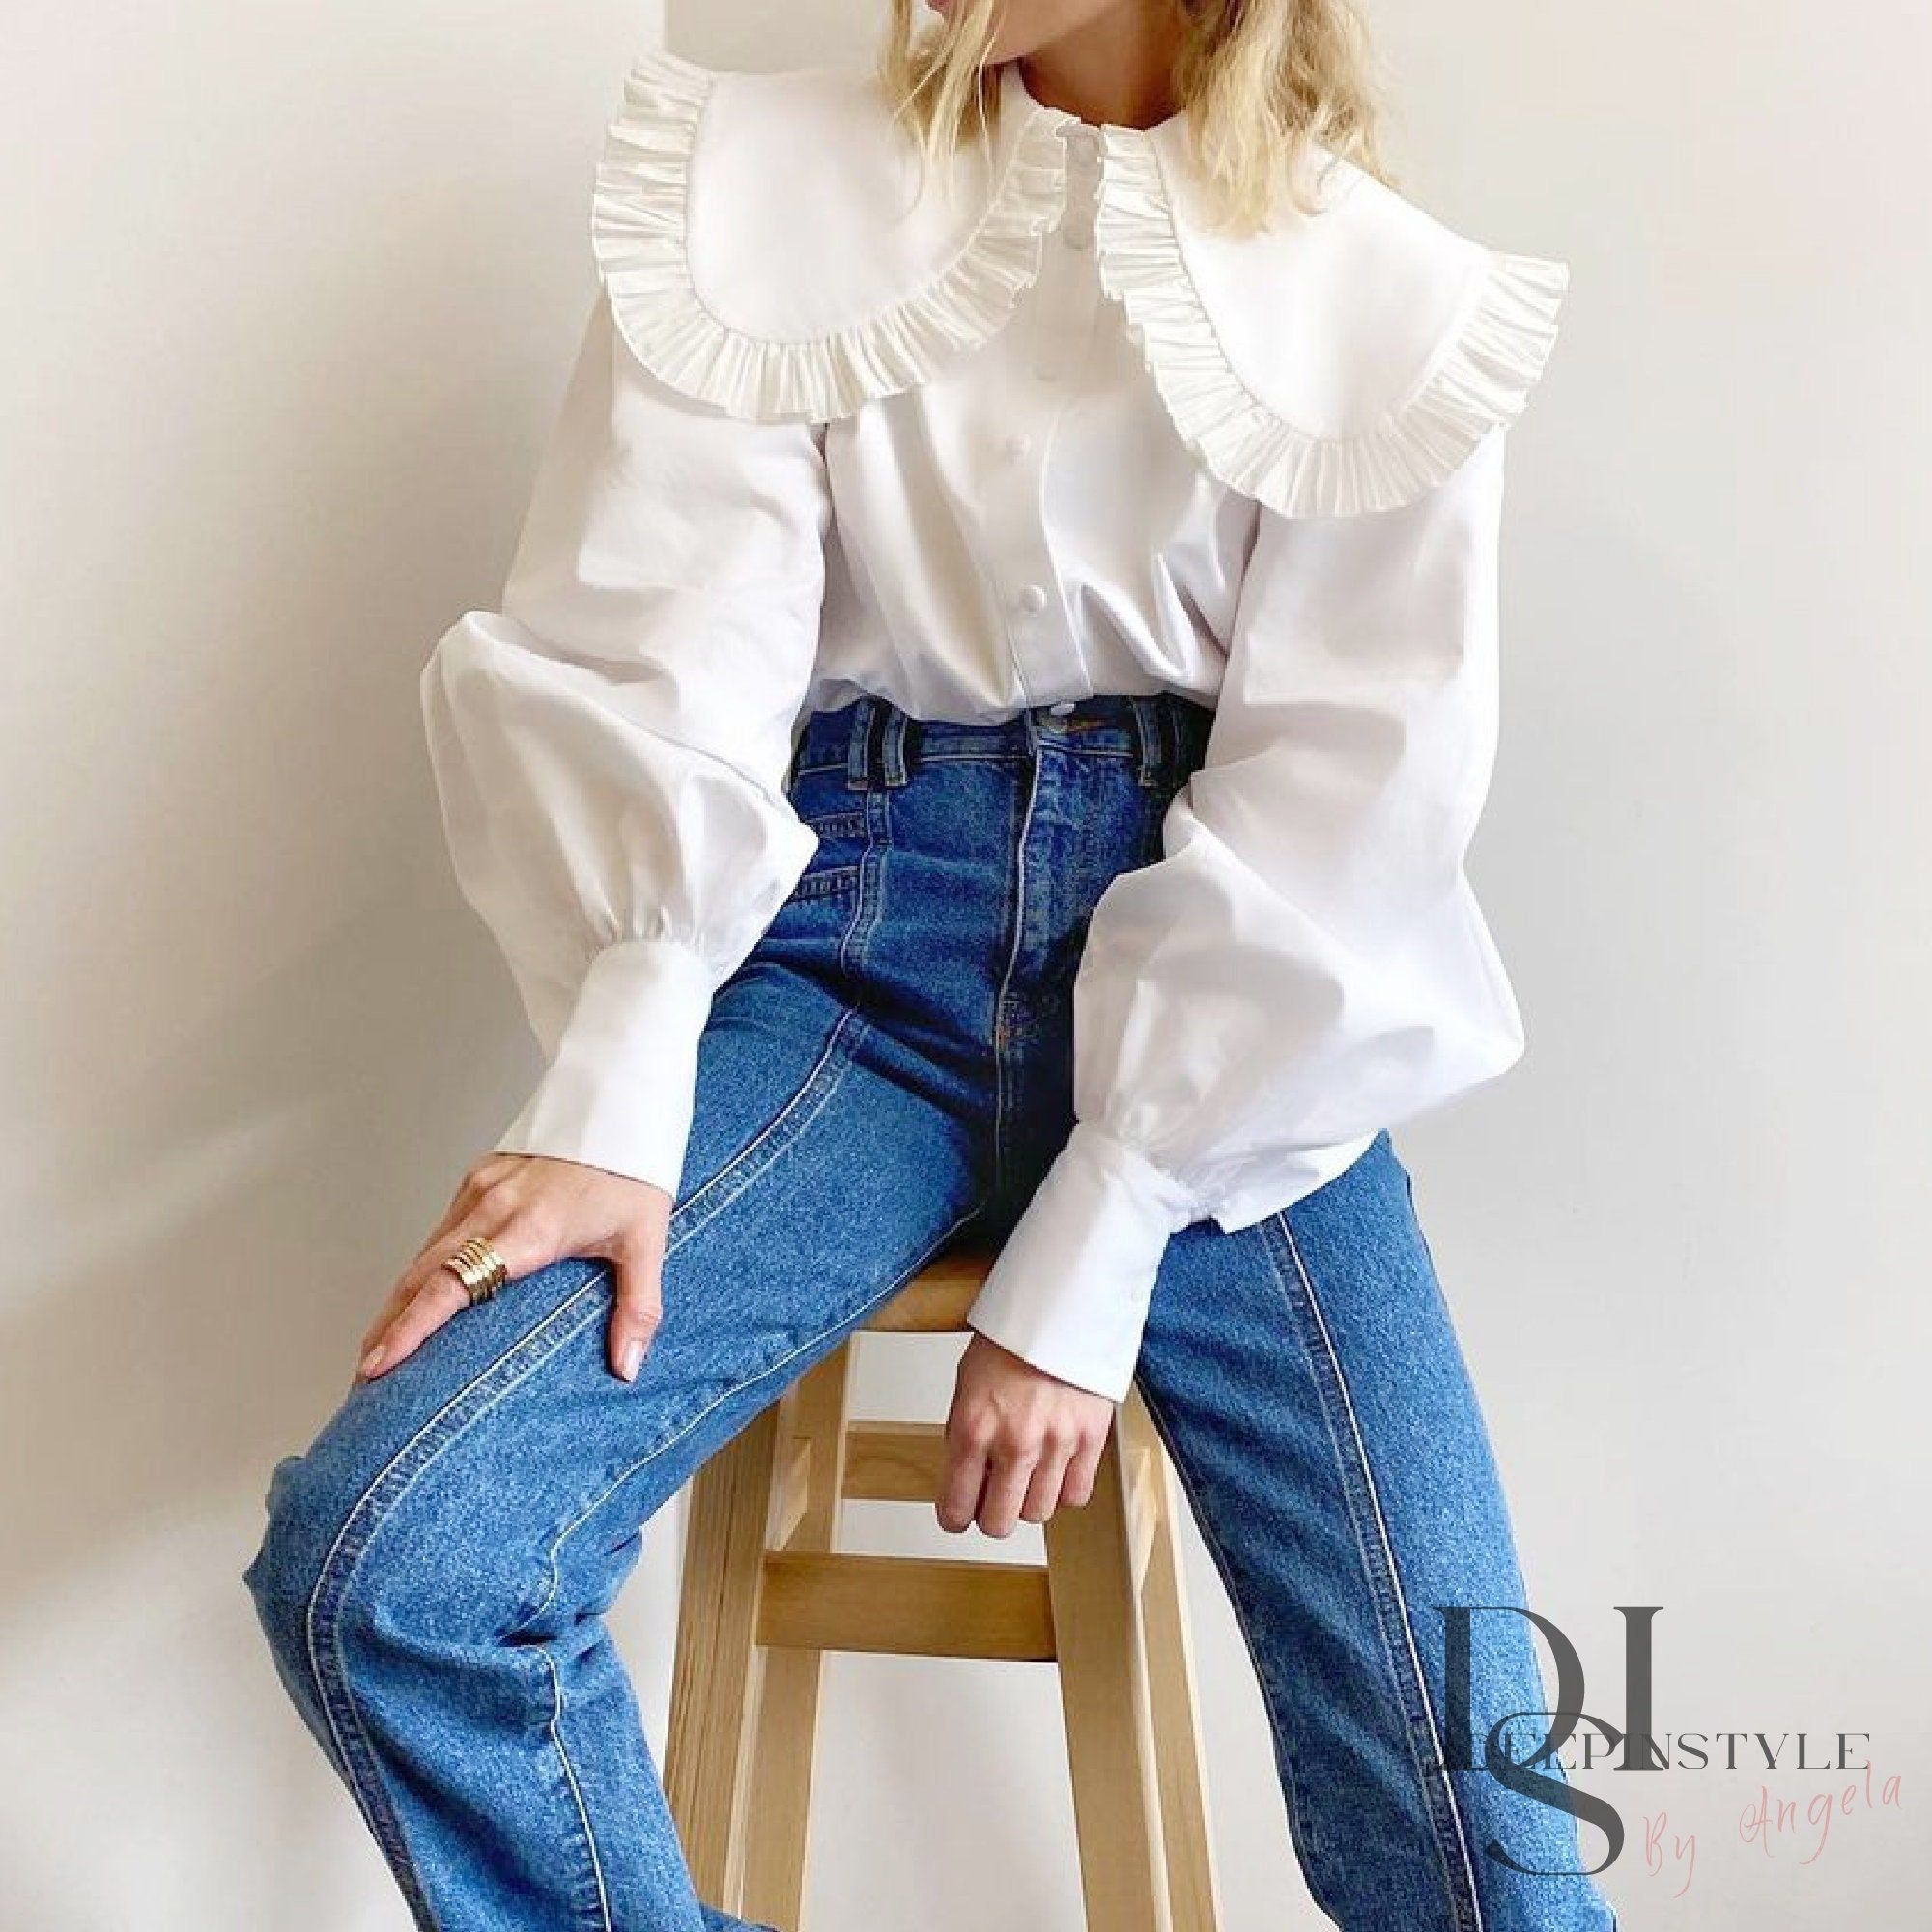 How to Wear White Ruffle Shirt: Best 15 Super Chic Outfit Ideas for Women